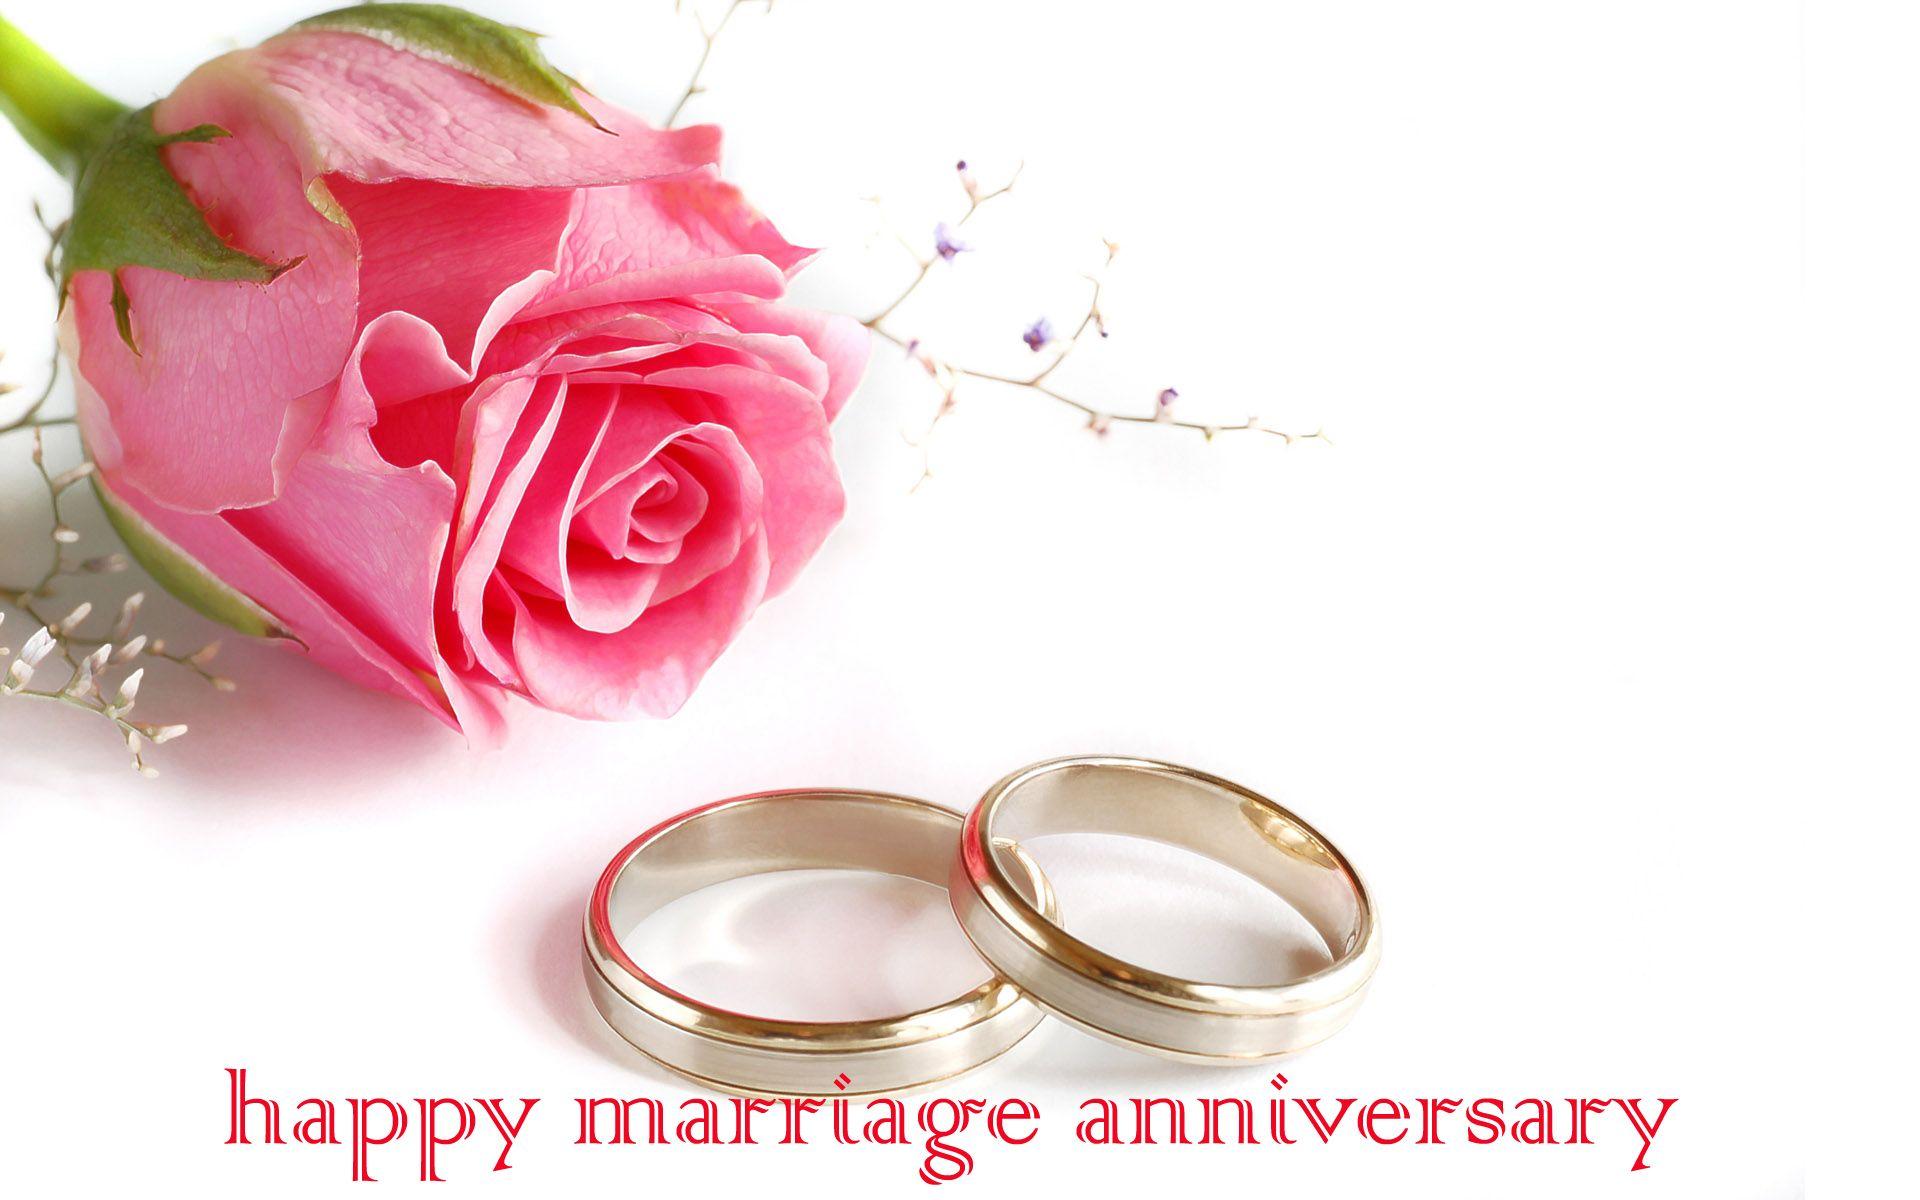 Wedding Anniversary Wishes HD Wallpaper And Image (4)